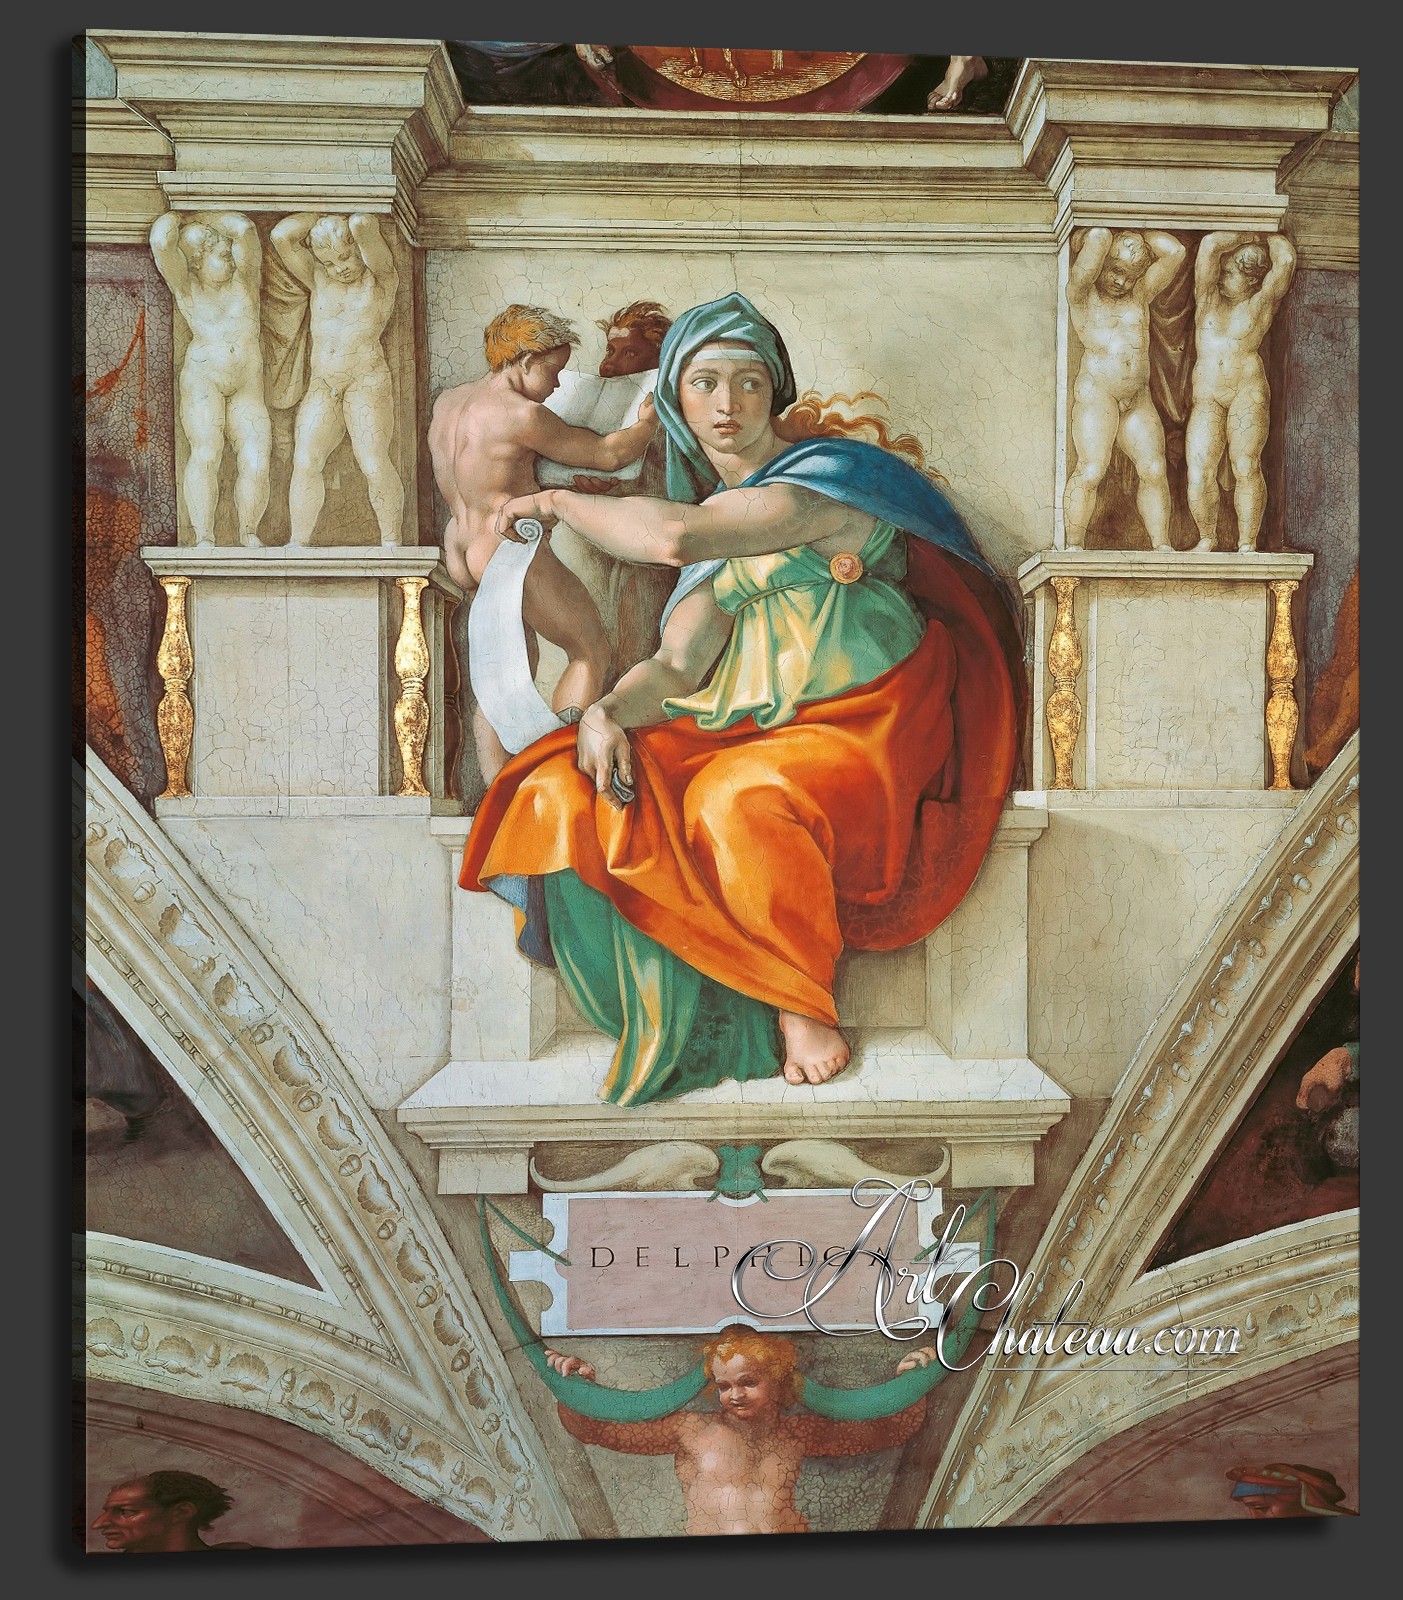 The Delphic Sibyl, after Painting by Michelangelo